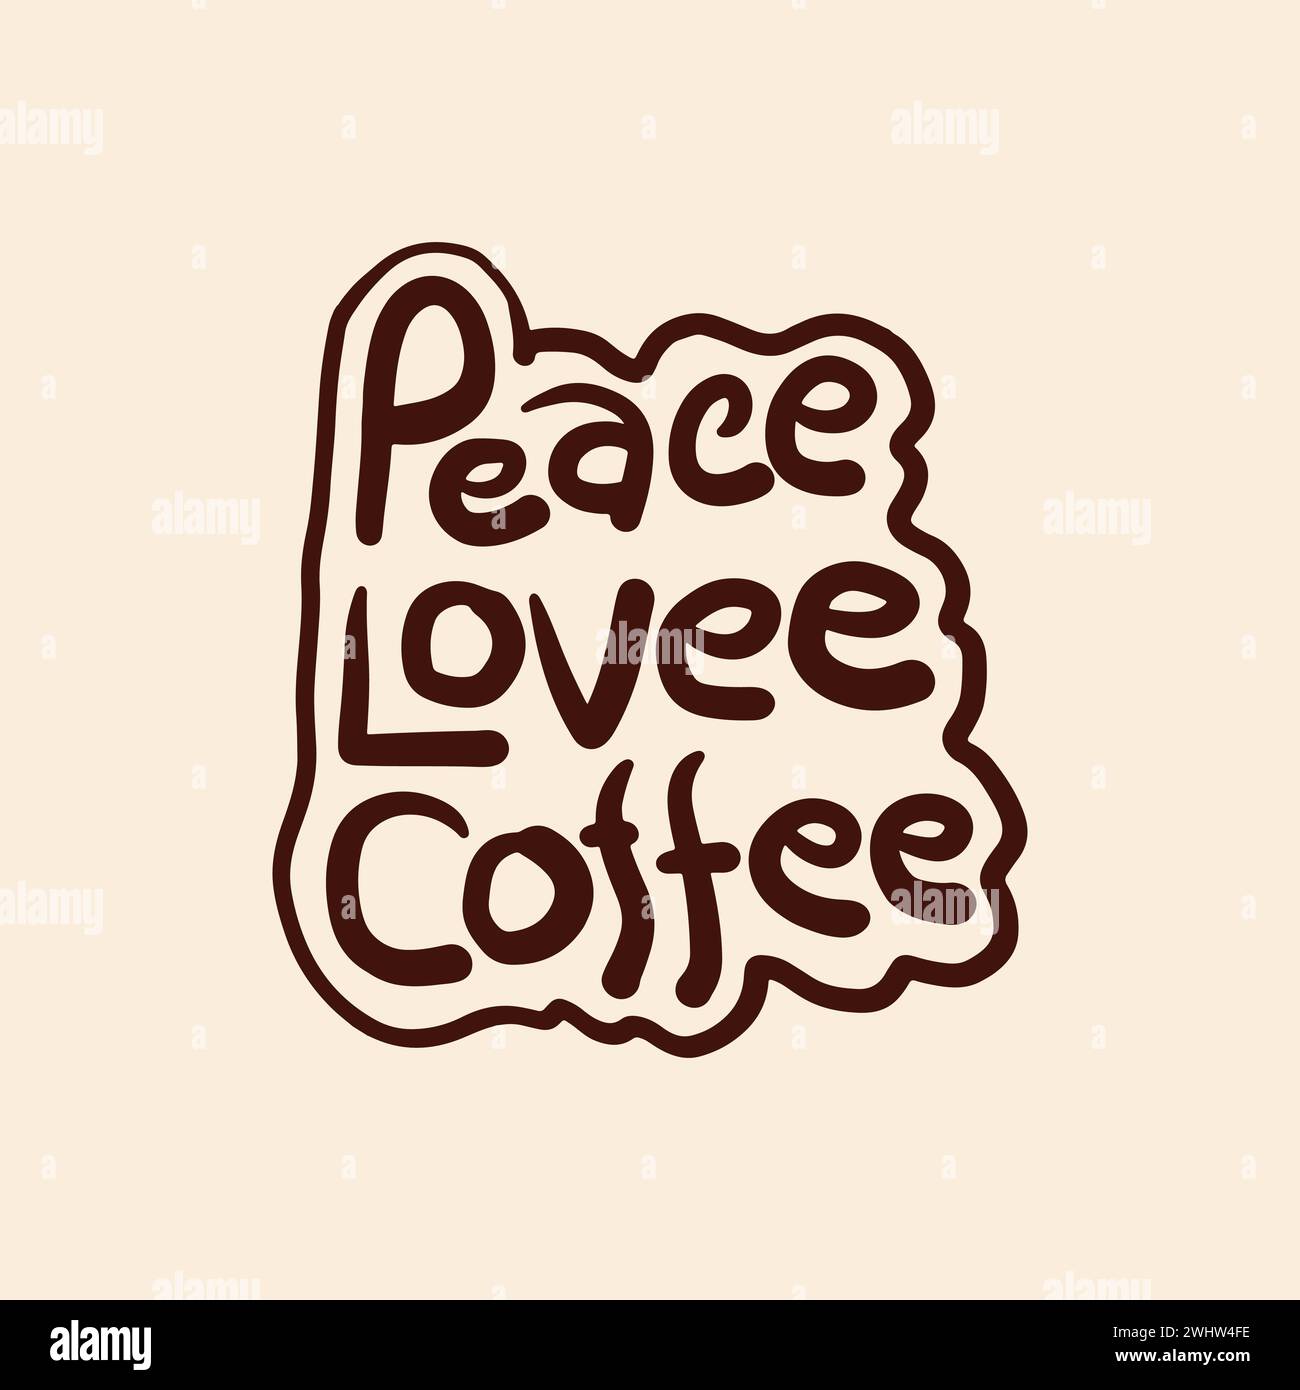 Coffee day hand drawn lettering quote for t shirt. Peace, love, coffee words typography vector illustration. Stock Vector